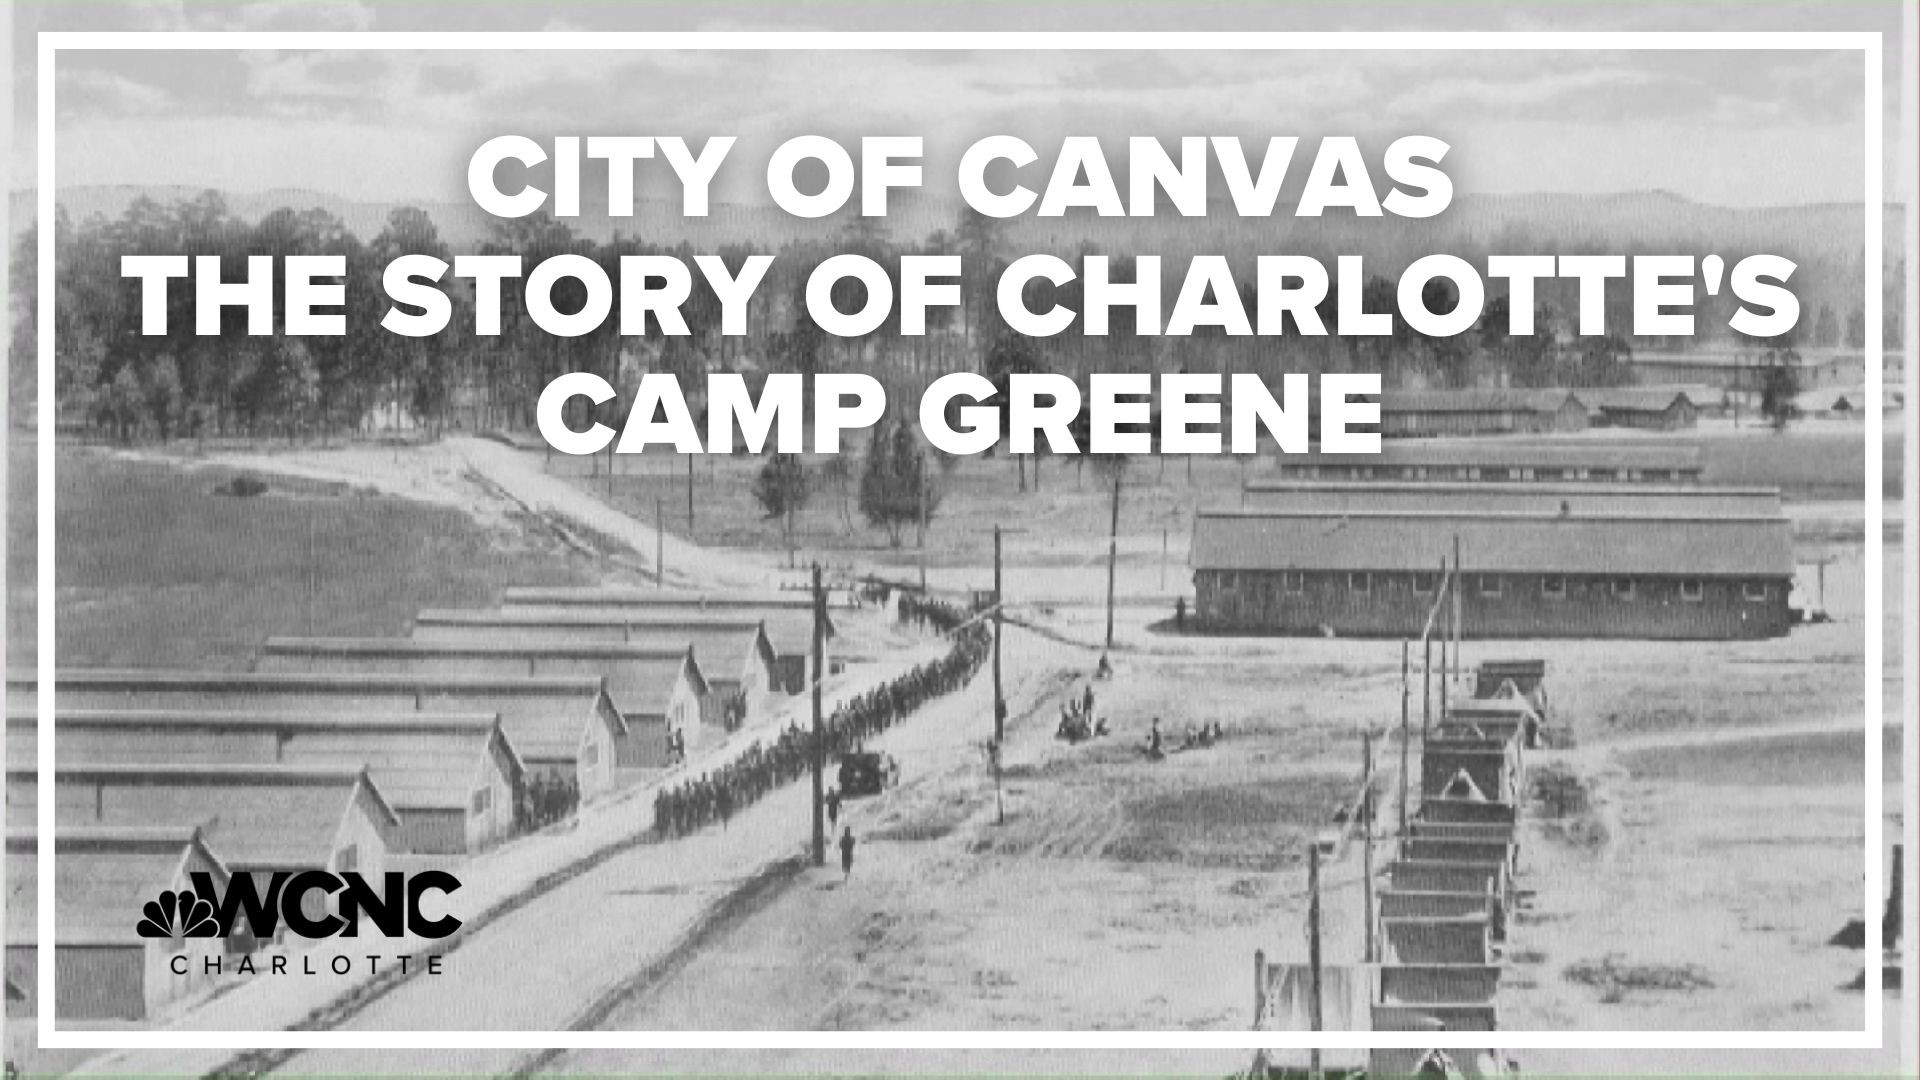 Long before Charlotte became a world-class city and financial center, it was known for cotton mills. That changed during World War I thanks to Camp Greene.